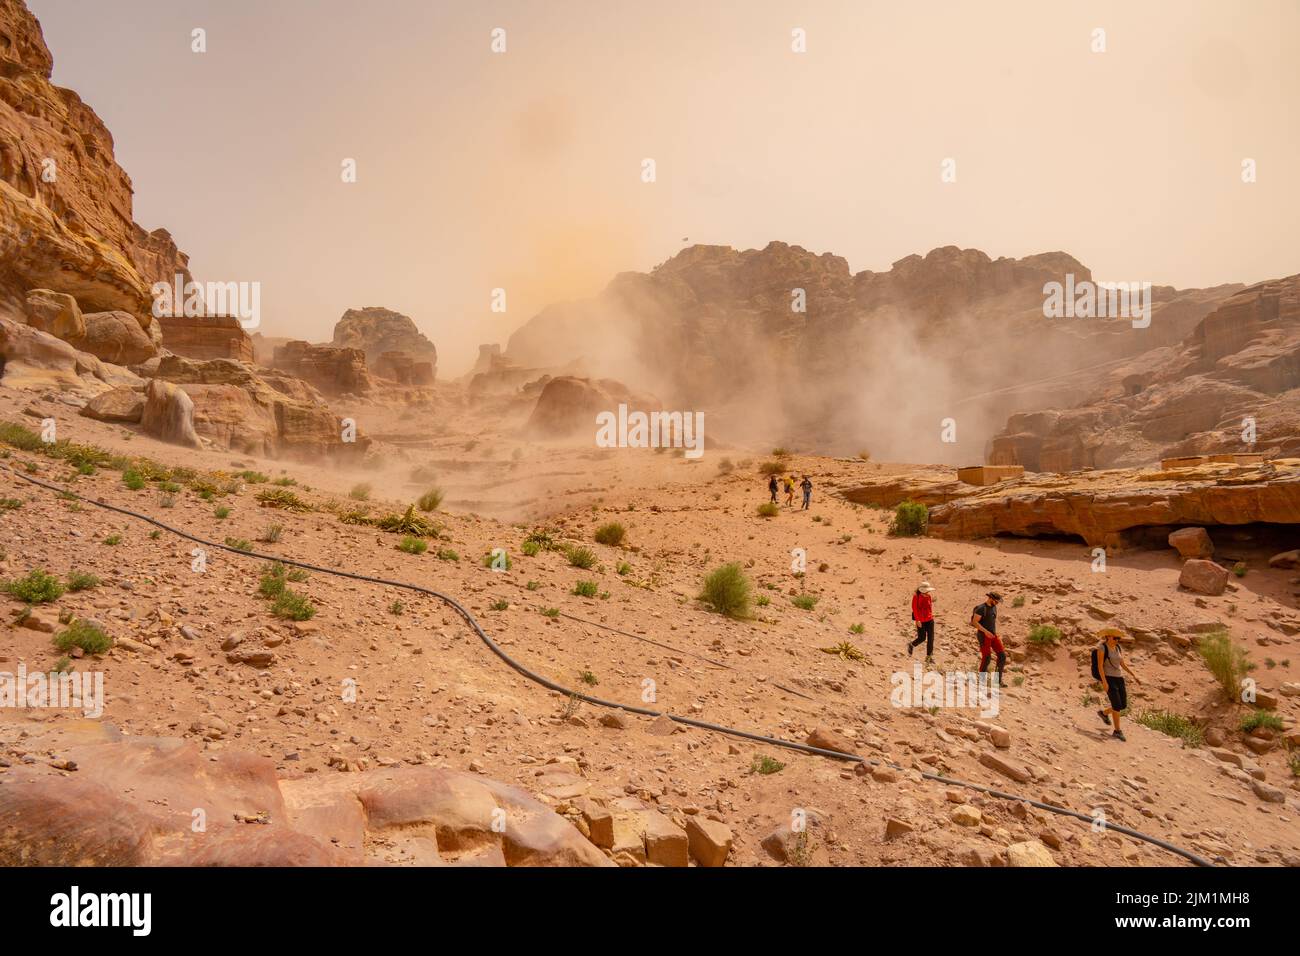 Outside the royal Tombs  Petra Jordan. With a dust storm blowing through Stock Photo